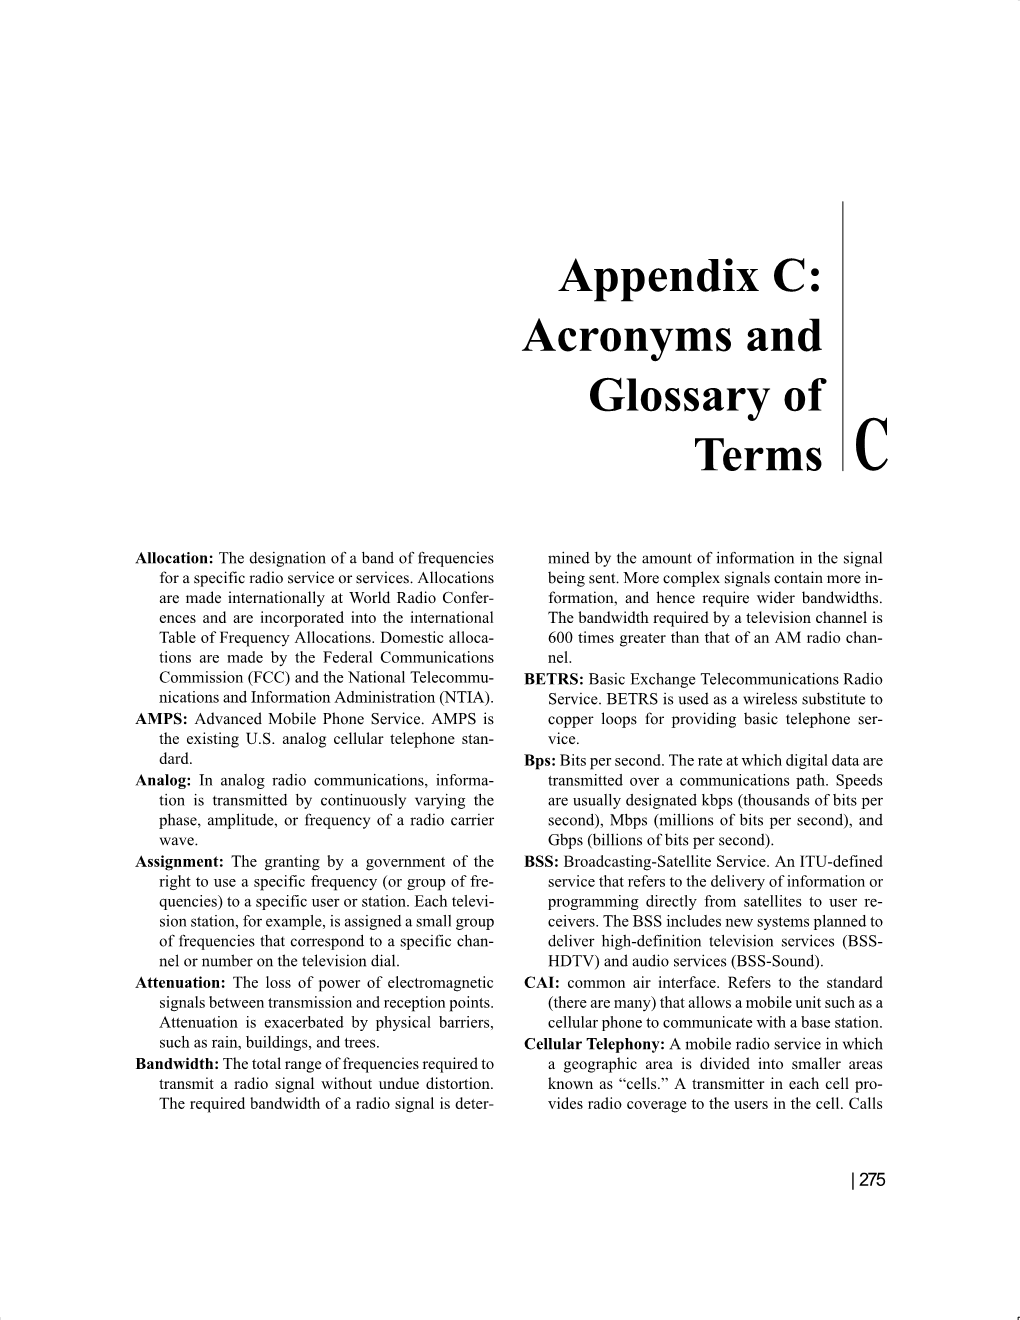 Appendix C: Acronyms and Glossary of Terms